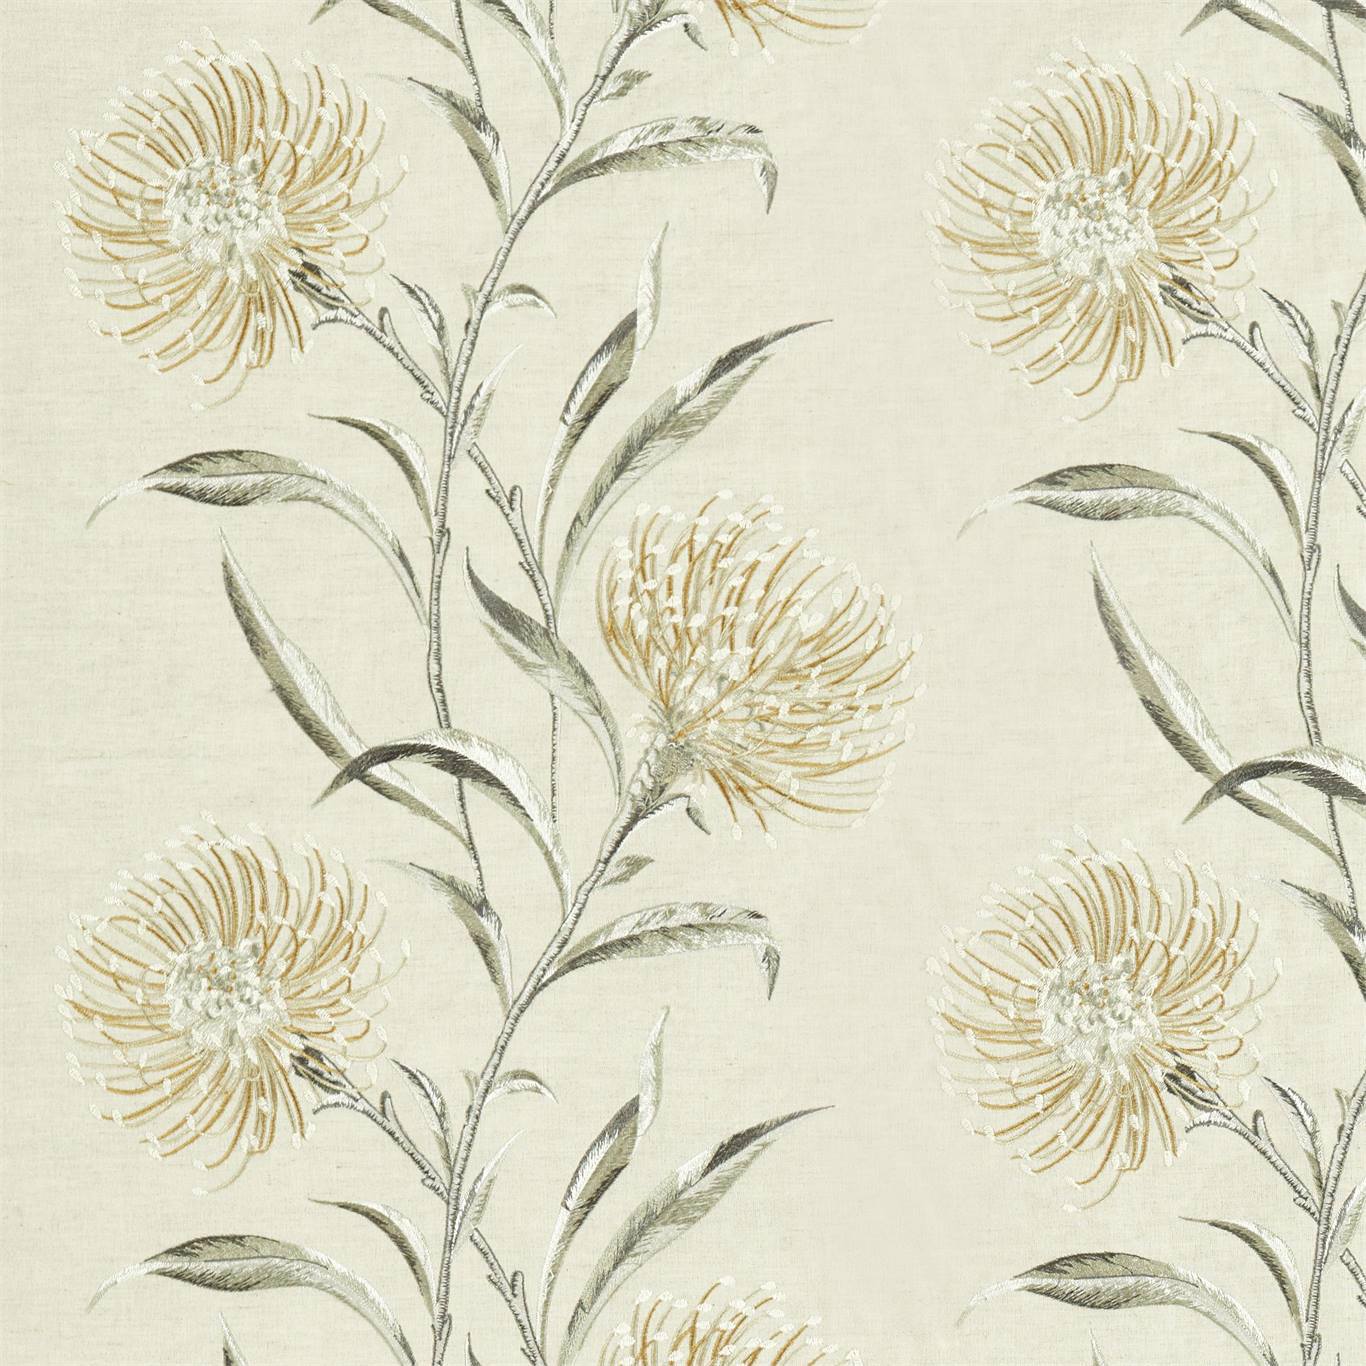 Catherinae Embroidery Fabric by Sanderson - DNTF237188 - Hay